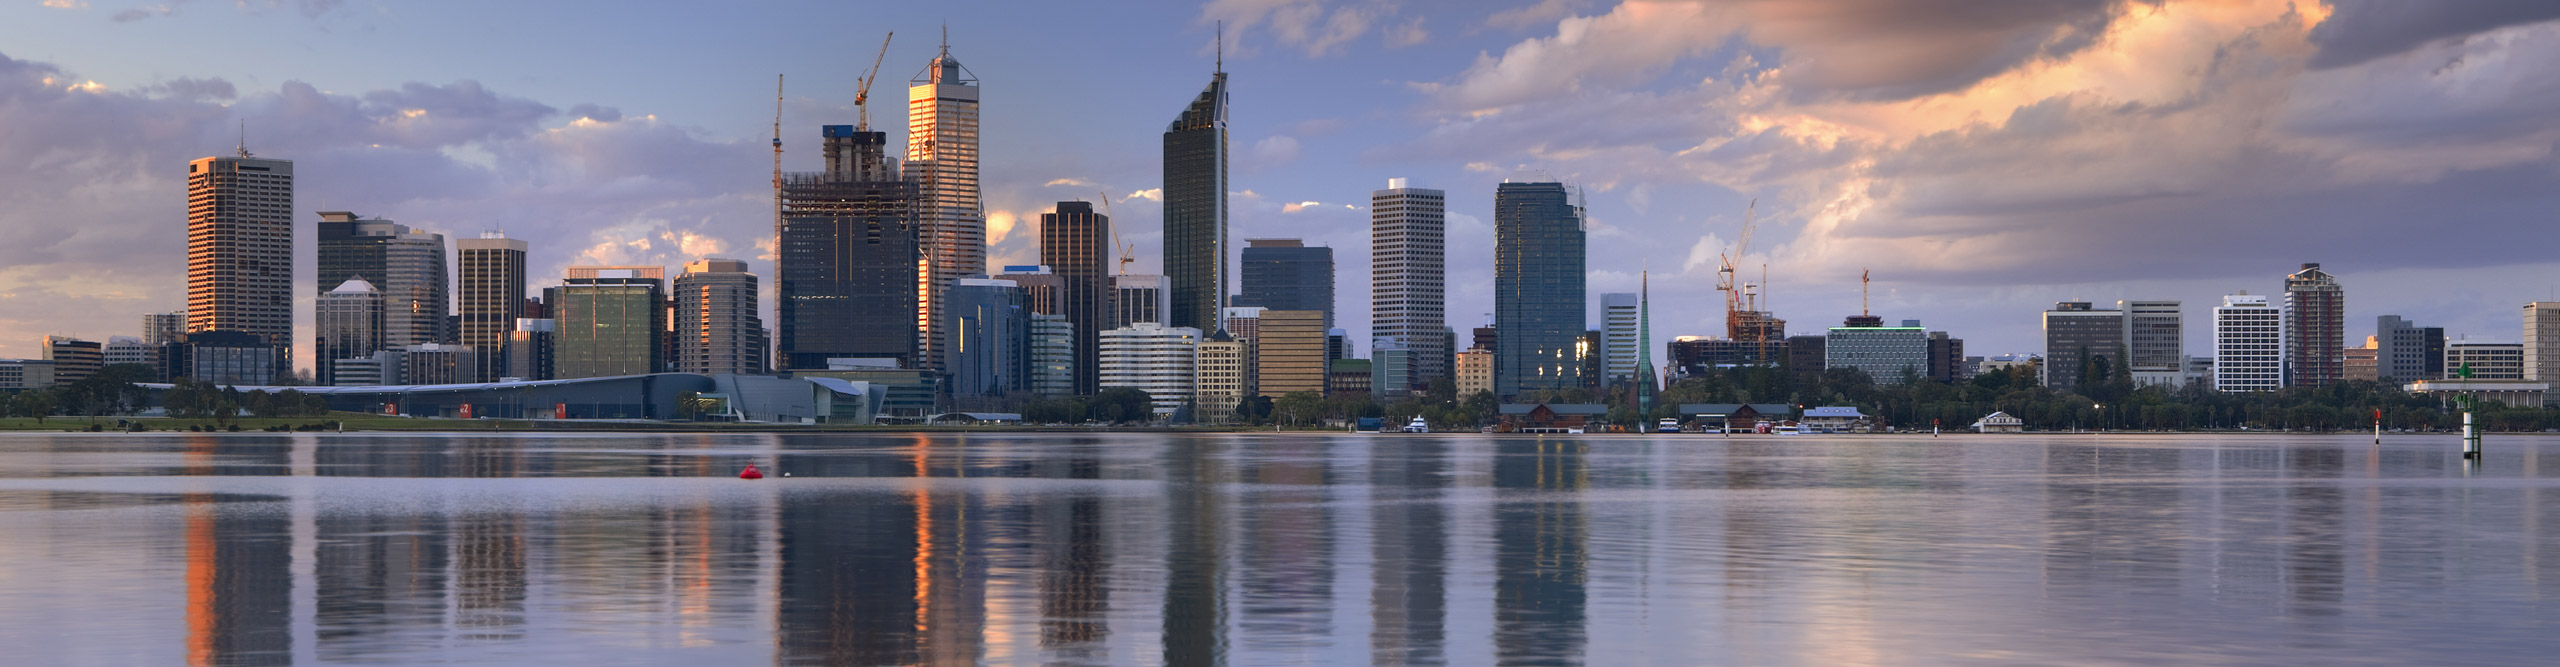 The view of the Perth skyline from across the Swan River, in Western Australia at sunset